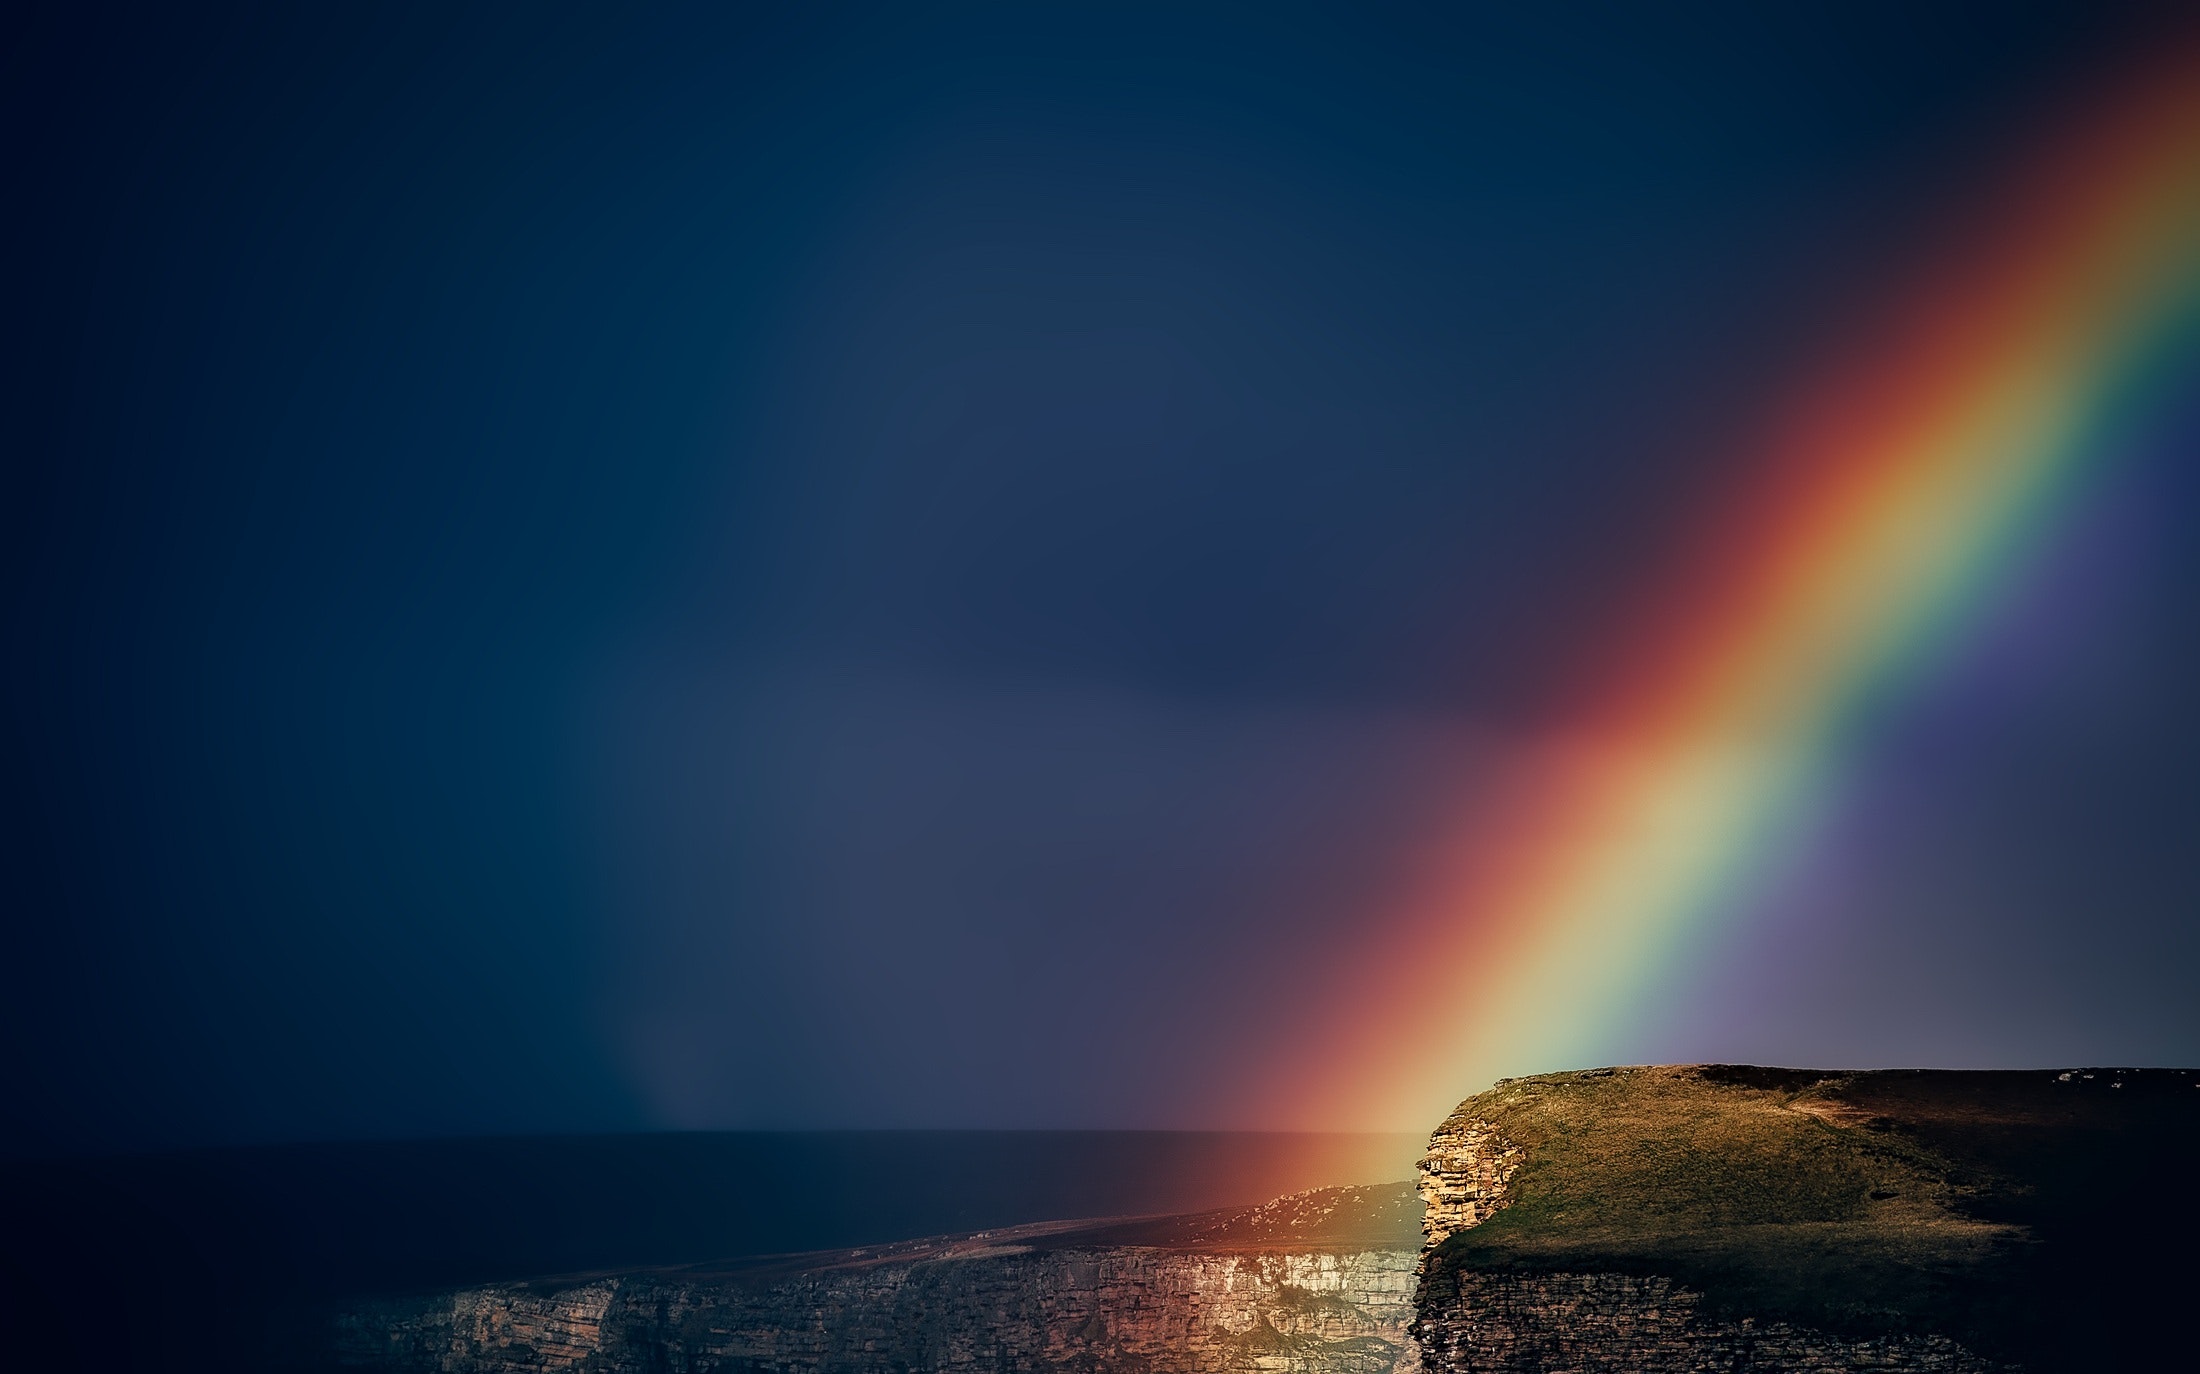 Photo by Pixabay: https://www.pexels.com/photo/rainbow-after-sunset-237250/